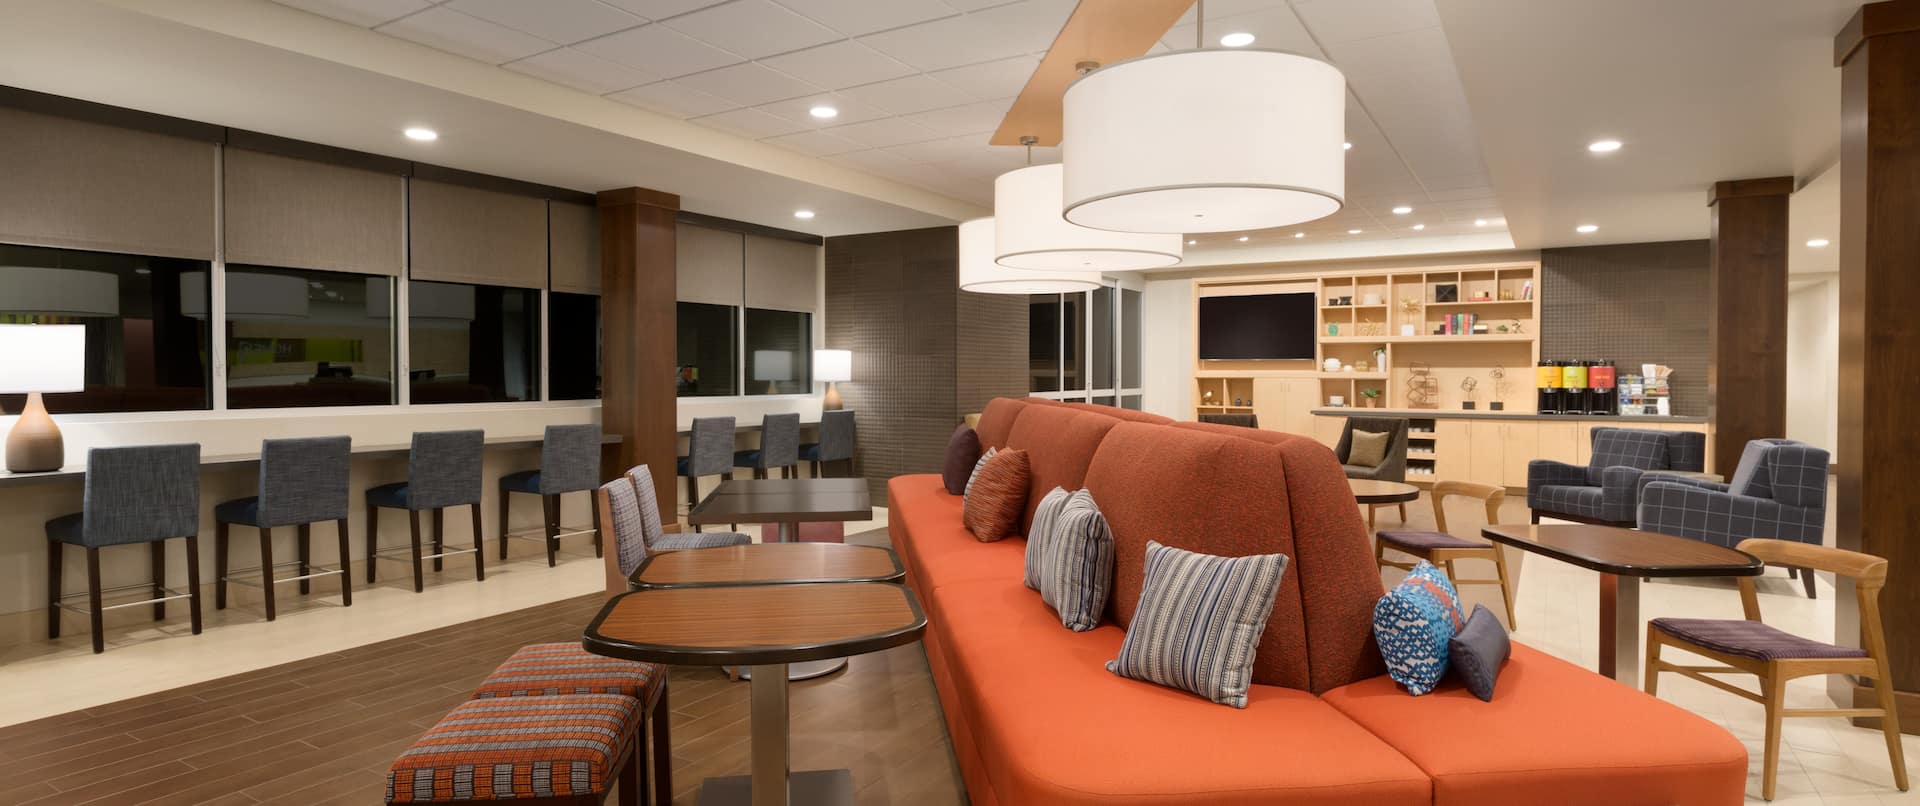 Oasis Lounge in Lobby With Table Seating by Large Orange Sofa, Decorative Lighting, Counter Seating by Windows, and View of TV and Beverage Station in Background